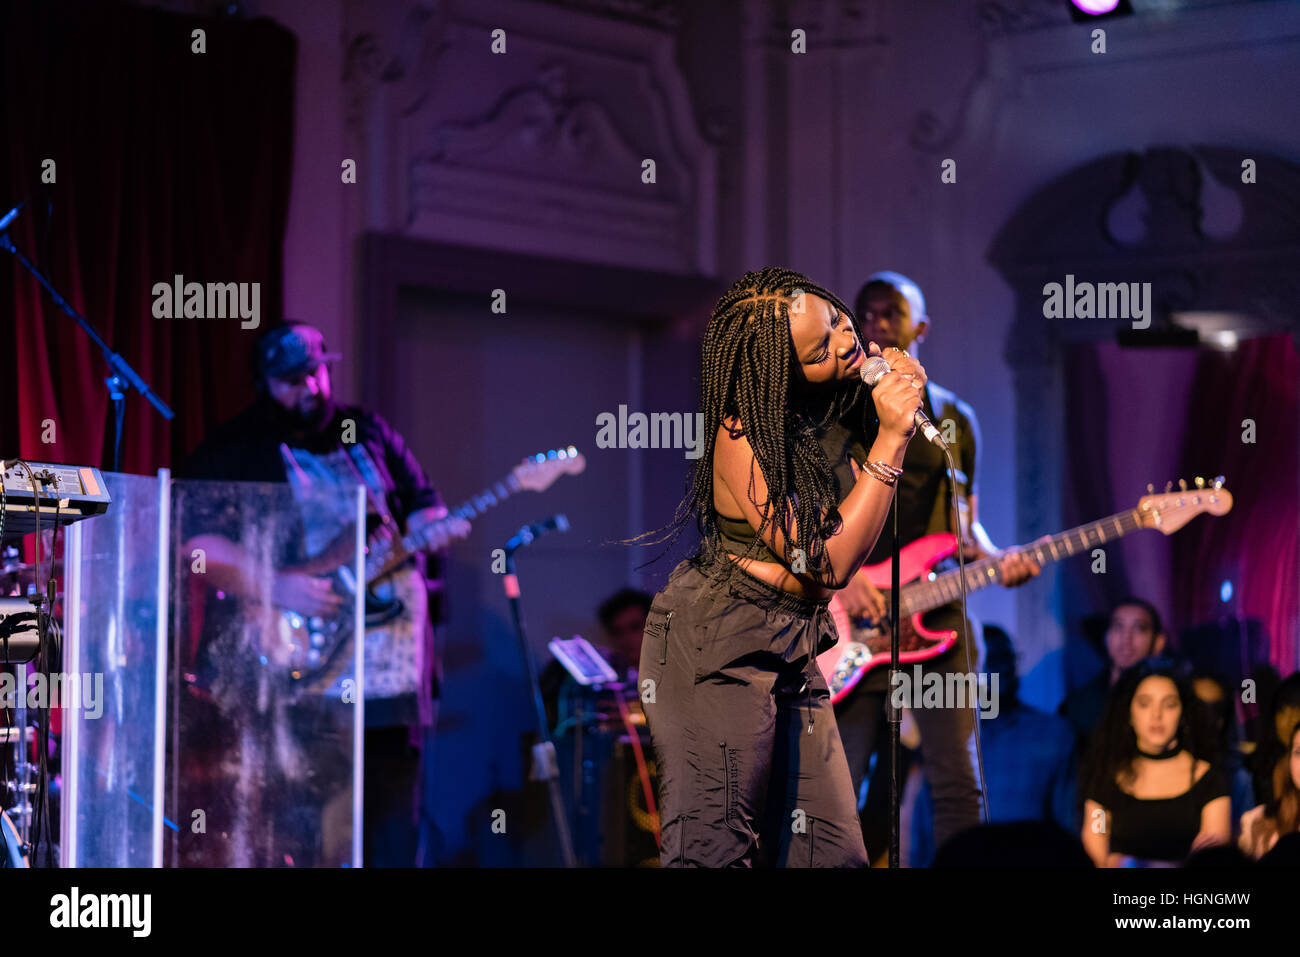 Ray BLK singing with her band at a live gig in September 2016. Stock Photo